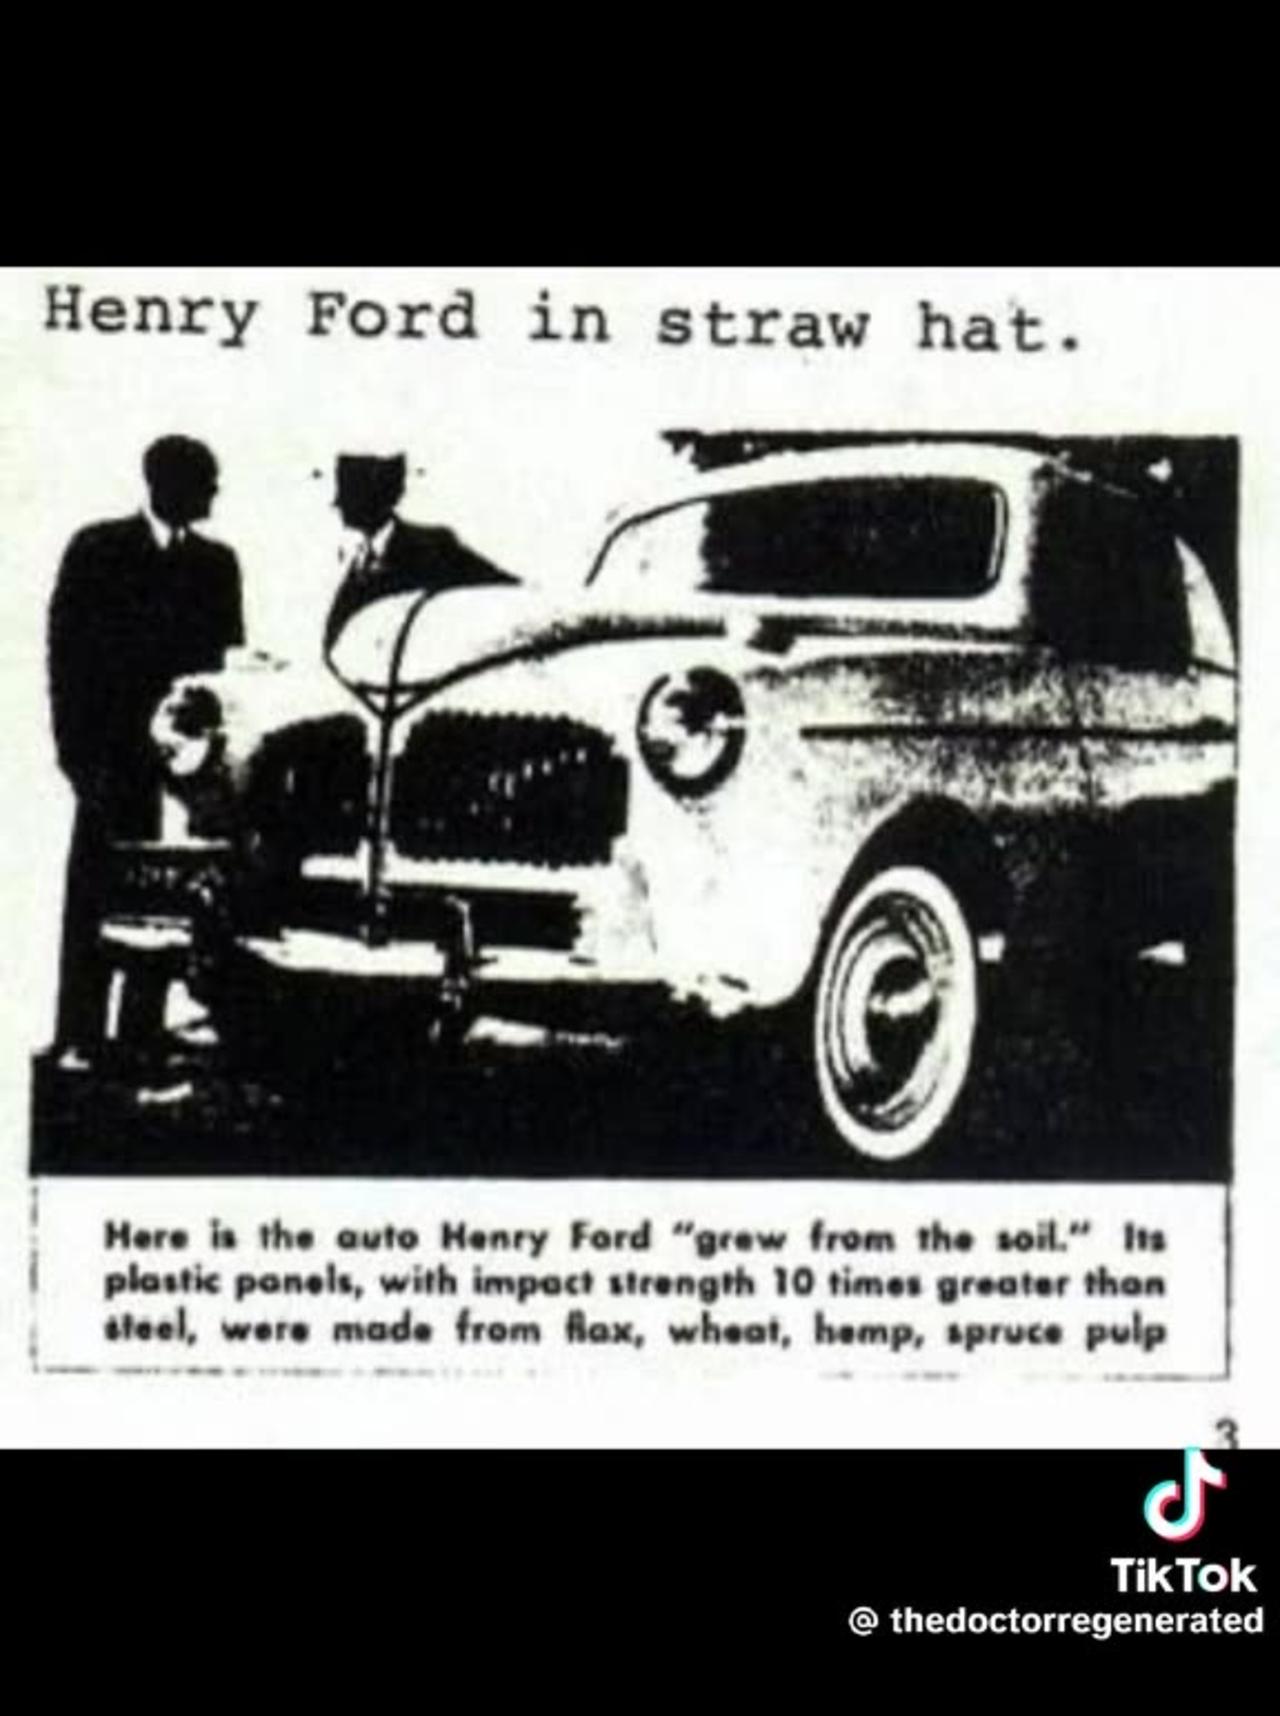 HENRY FORD’S PLASTIC HEMP CAR MADE IN 1941~IT NOT ONLY RAN OFF HEMP SEED OIL ~IT WAS ALSO MADE WITH HEMP